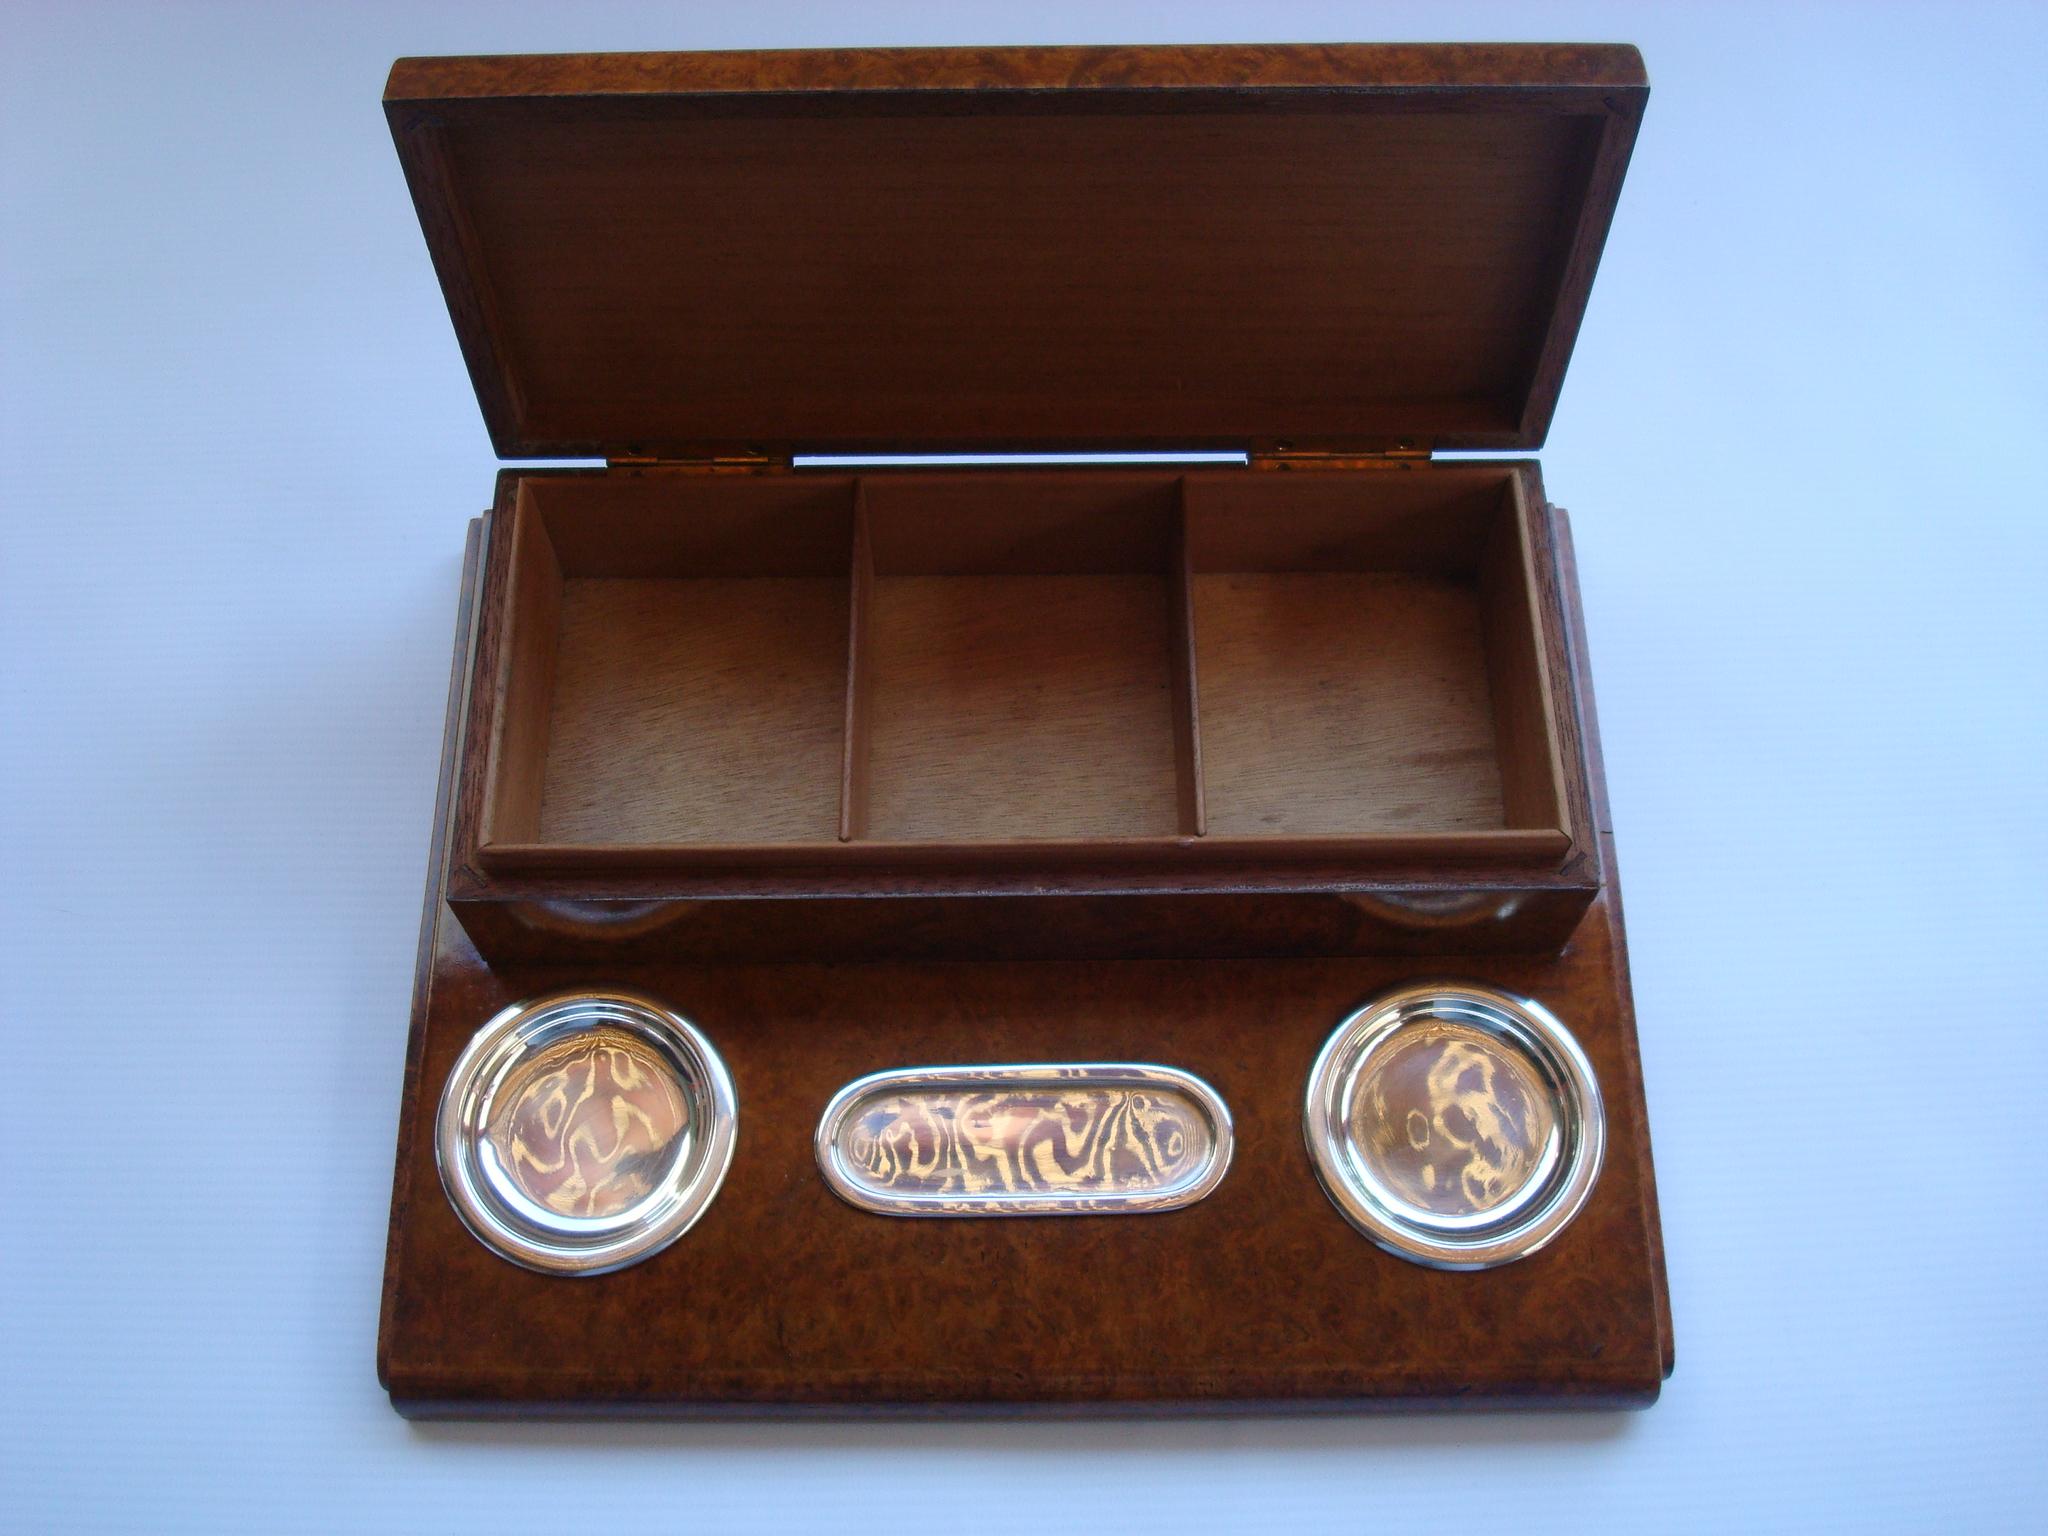 Gustave Keller Paris Cigarette / Cigar root box desk smokers set. France 1930´s.
The box can be used for cigarettes and for cigars, as it has two little woodes walls that can be mooved depending on what you want the box for. Everything is in very